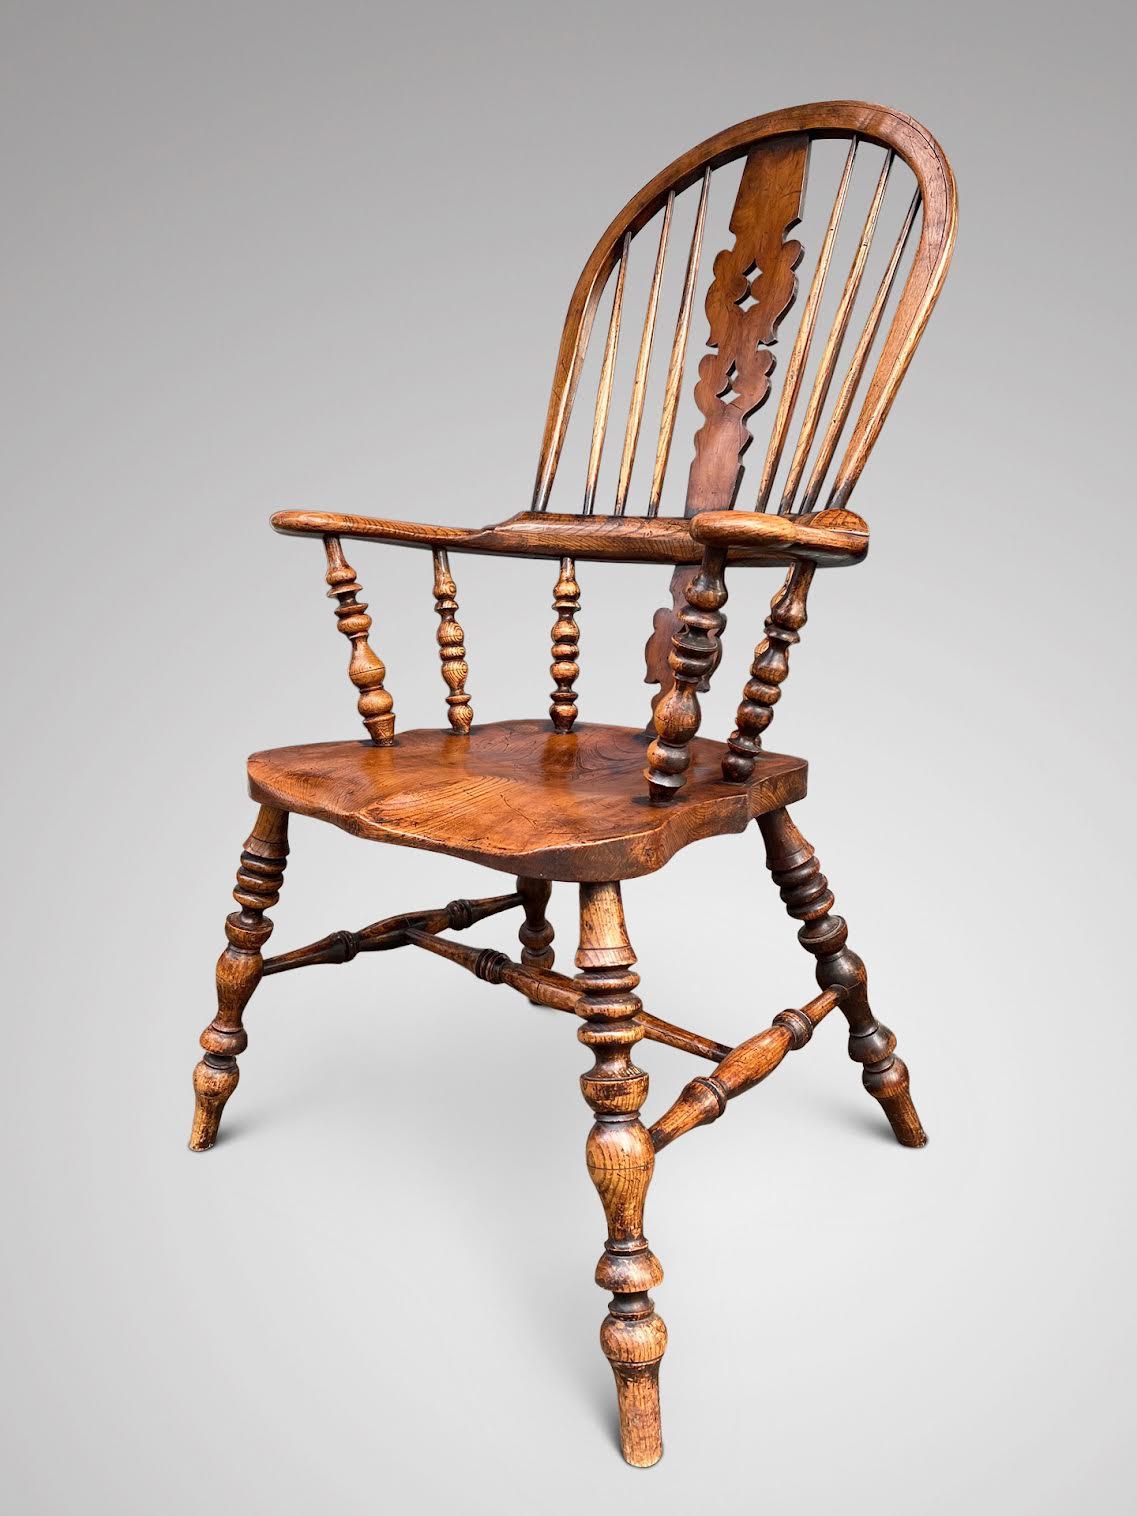 A beautiful elm broad arm Windsor chair, superb quality 19th Century, high back with central fretted decorative splat and turned spindles, with elm seat with a three piece arm bow sitting on nicely turned legs connected by a H-stretcher. Lovely